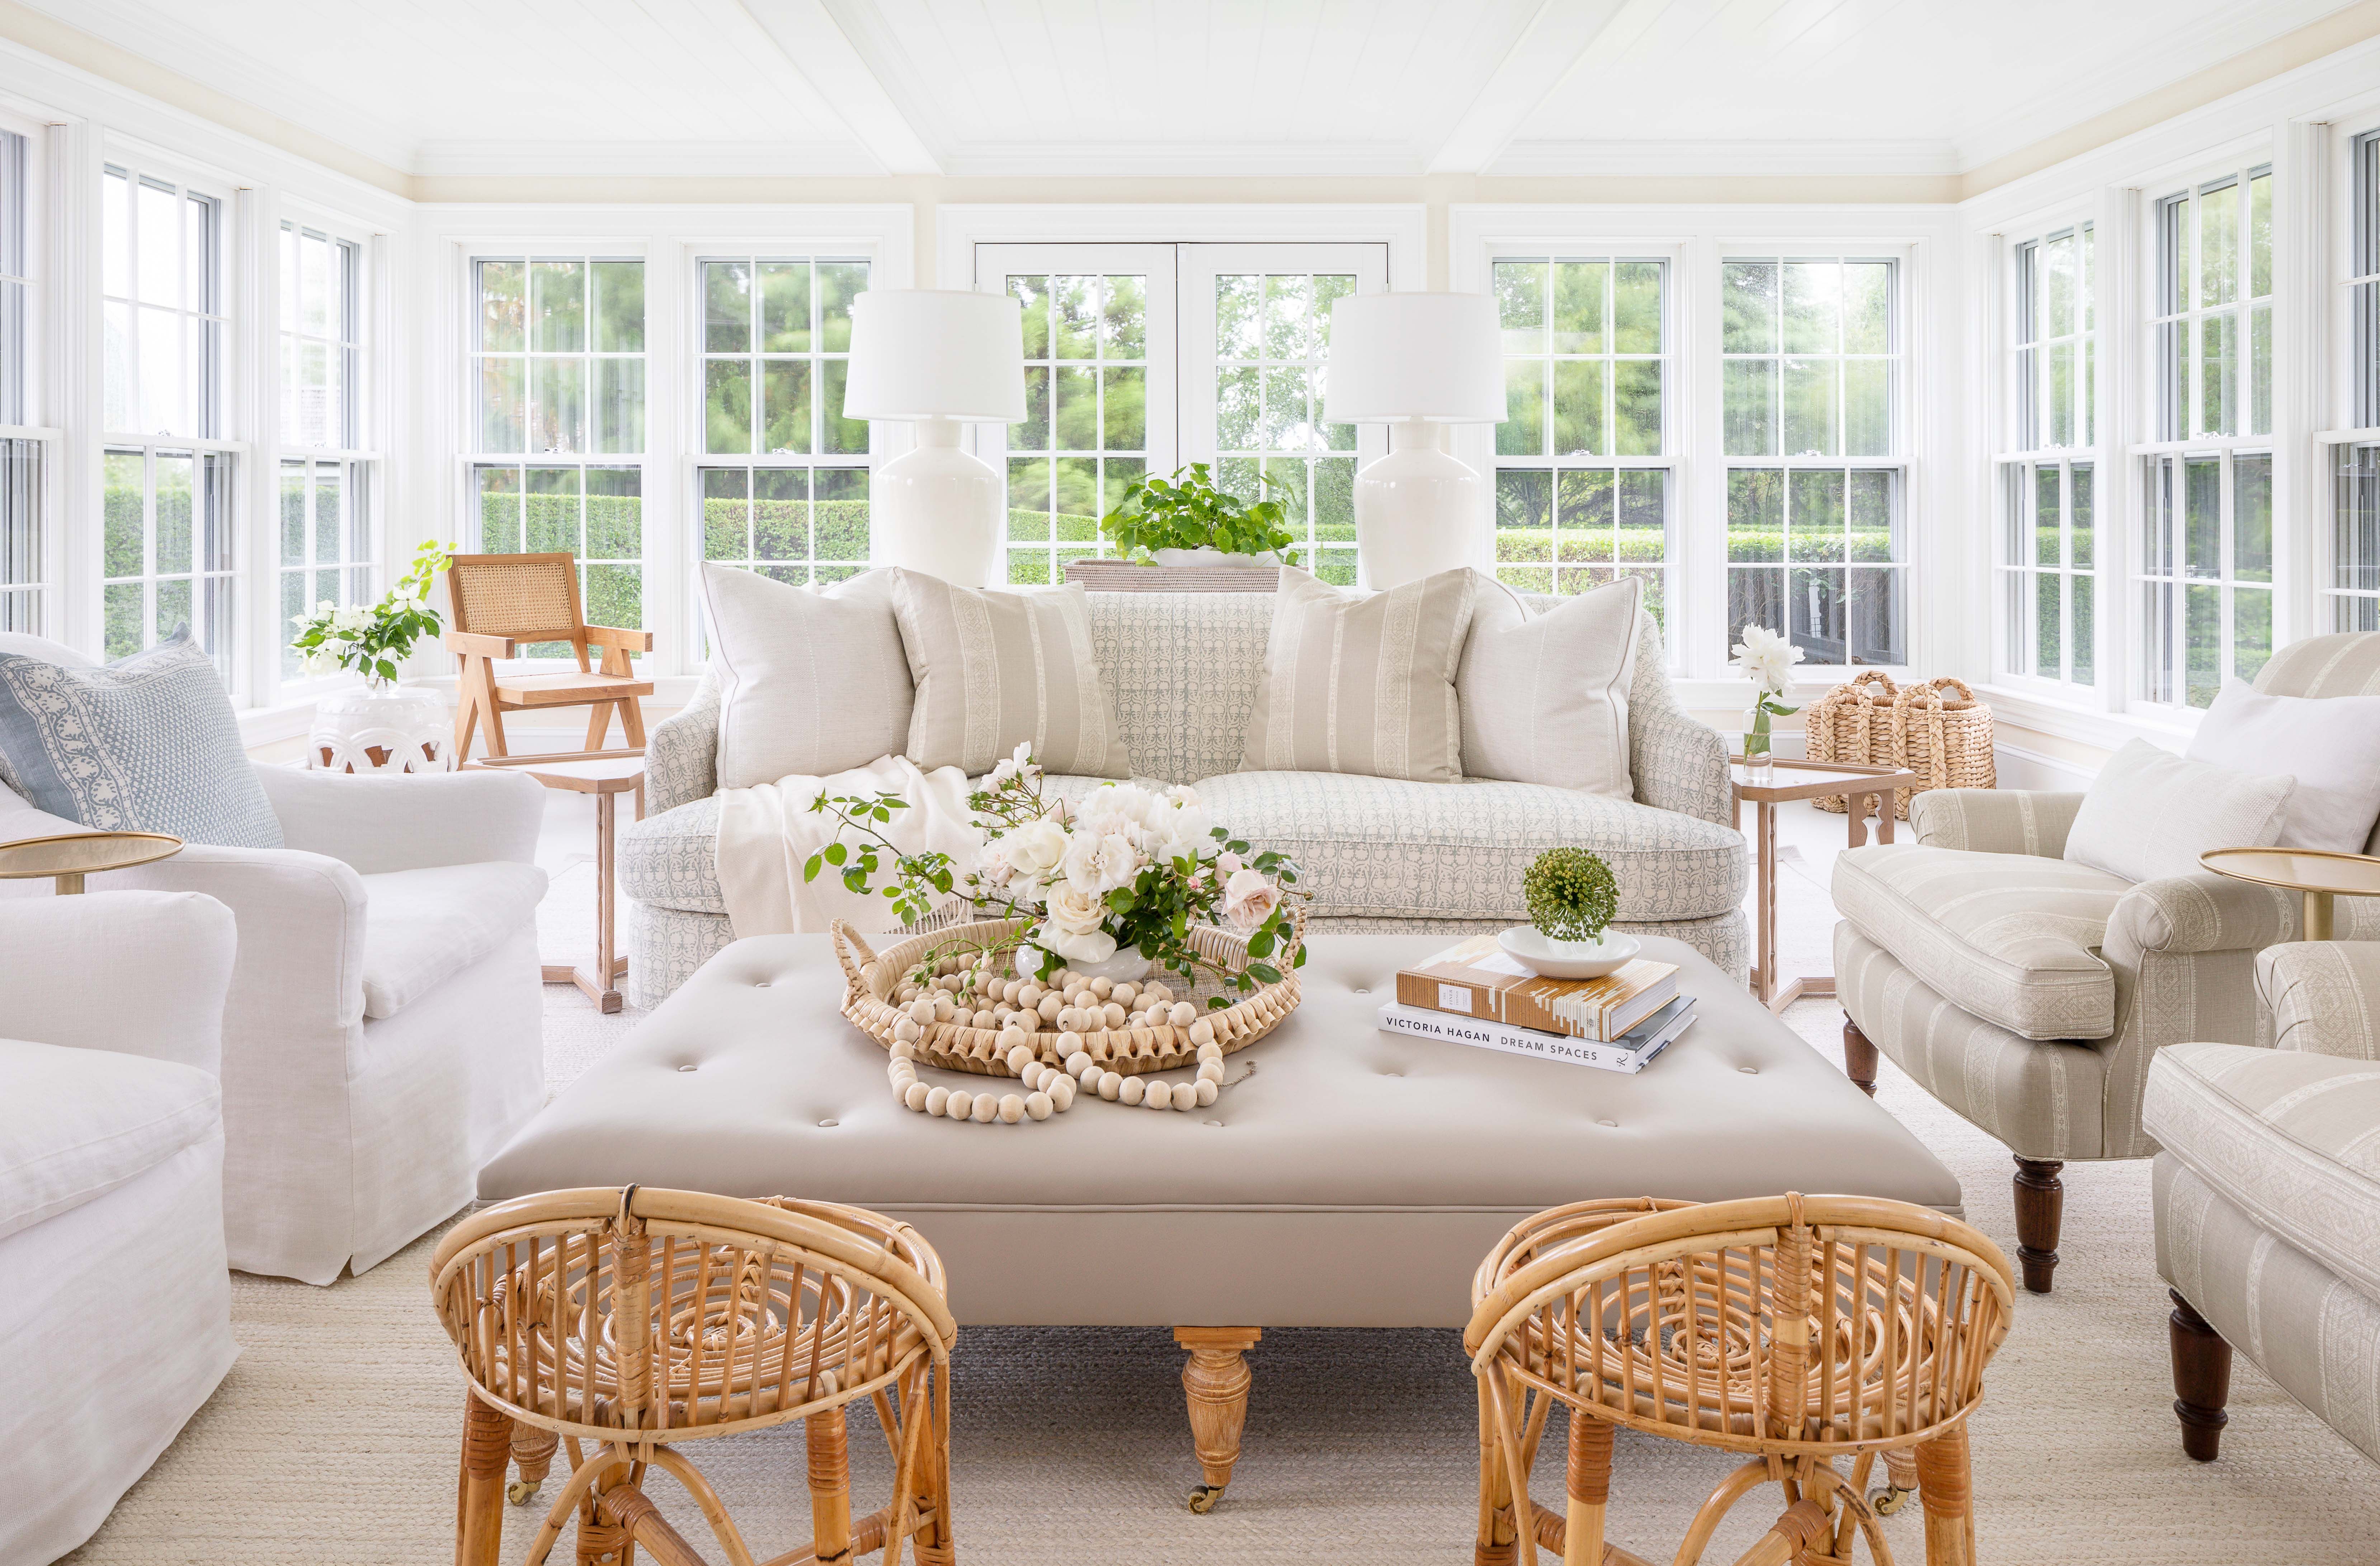 Home Decorating Trends 2020 House, Most Beautiful Living Rooms 2020